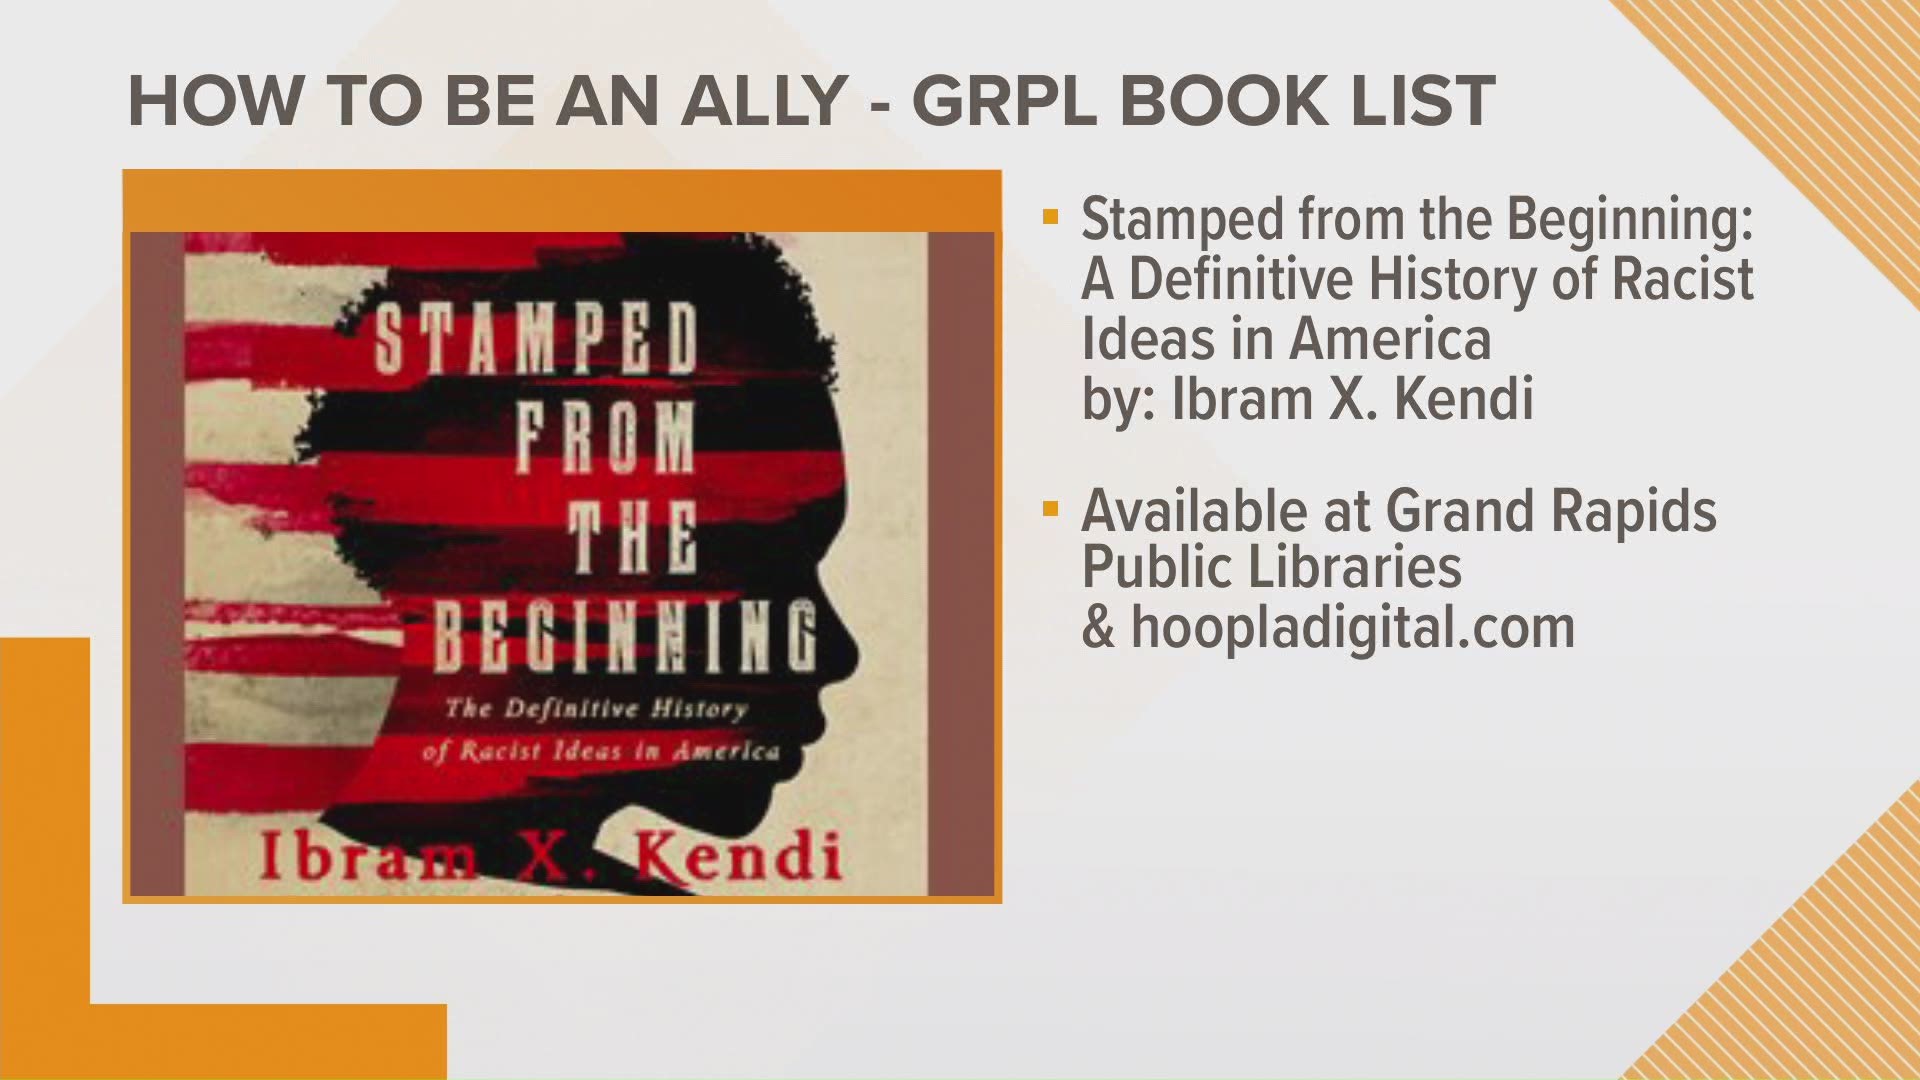 This week, we are showcasing titles apart of Grand Rapids Public Library "How to be a Good Ally" book list.